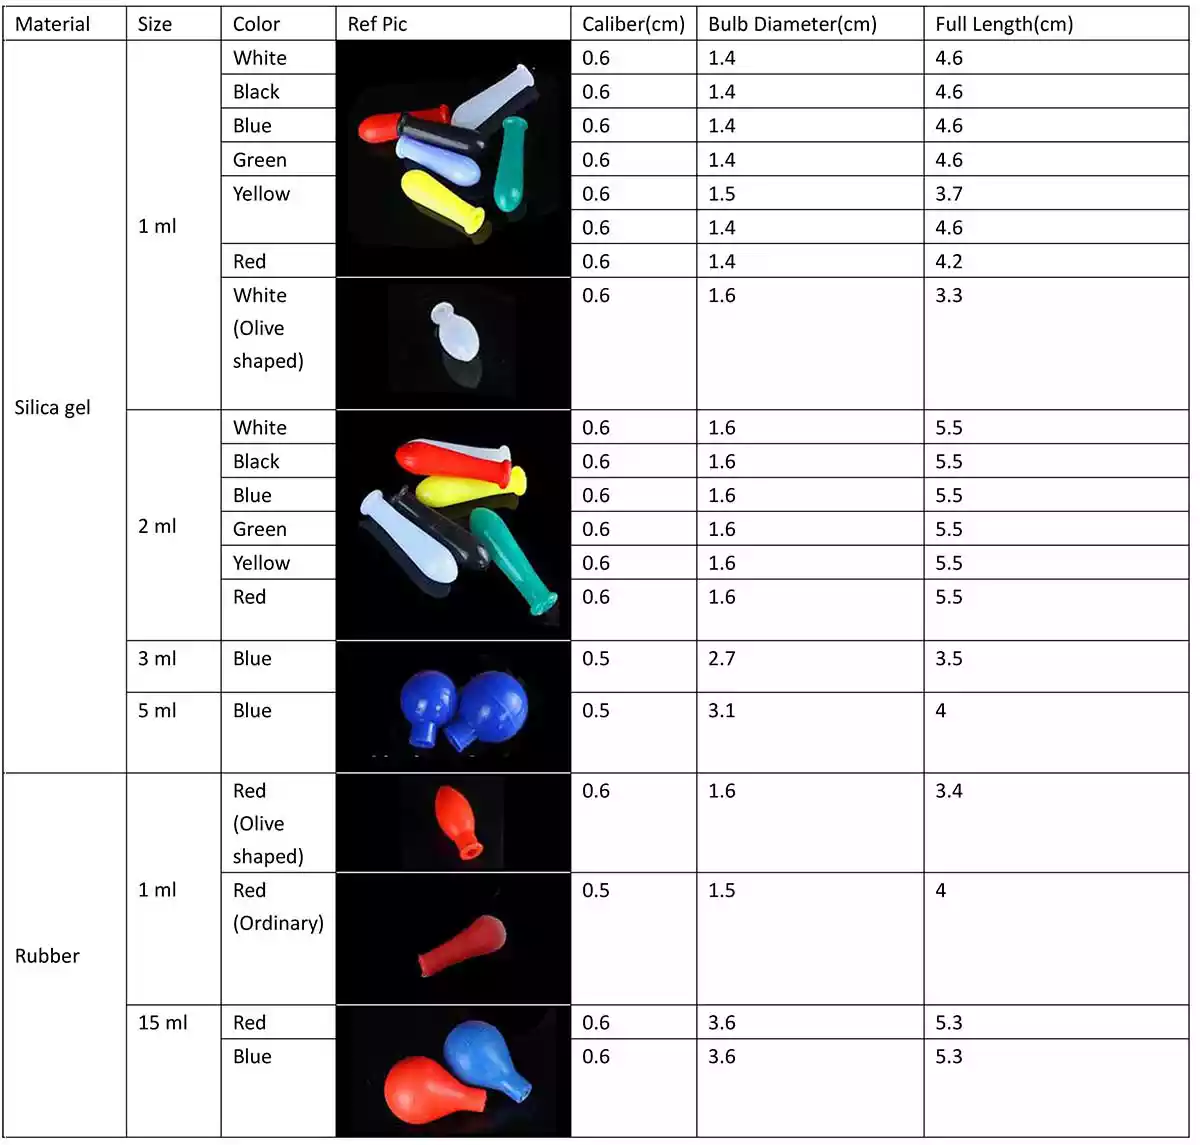 Pipette Bulb size and colors